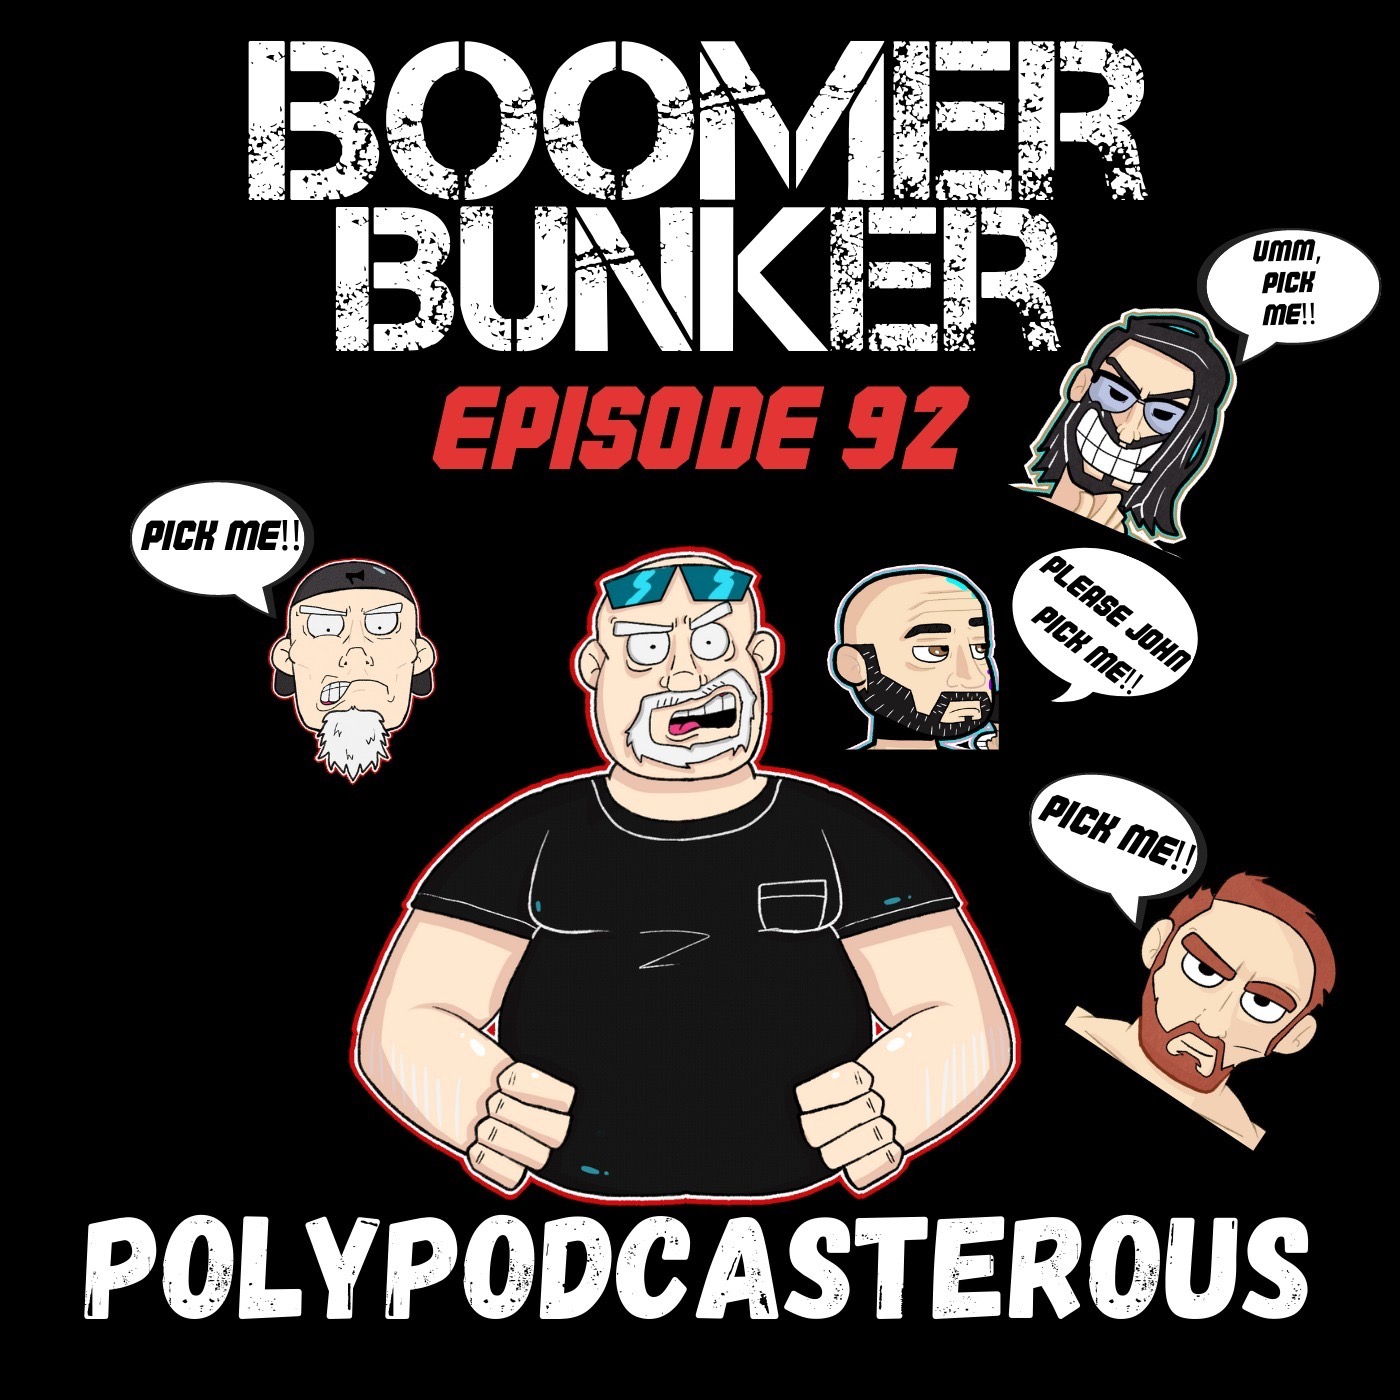 Polypodcasterous | Episode 092